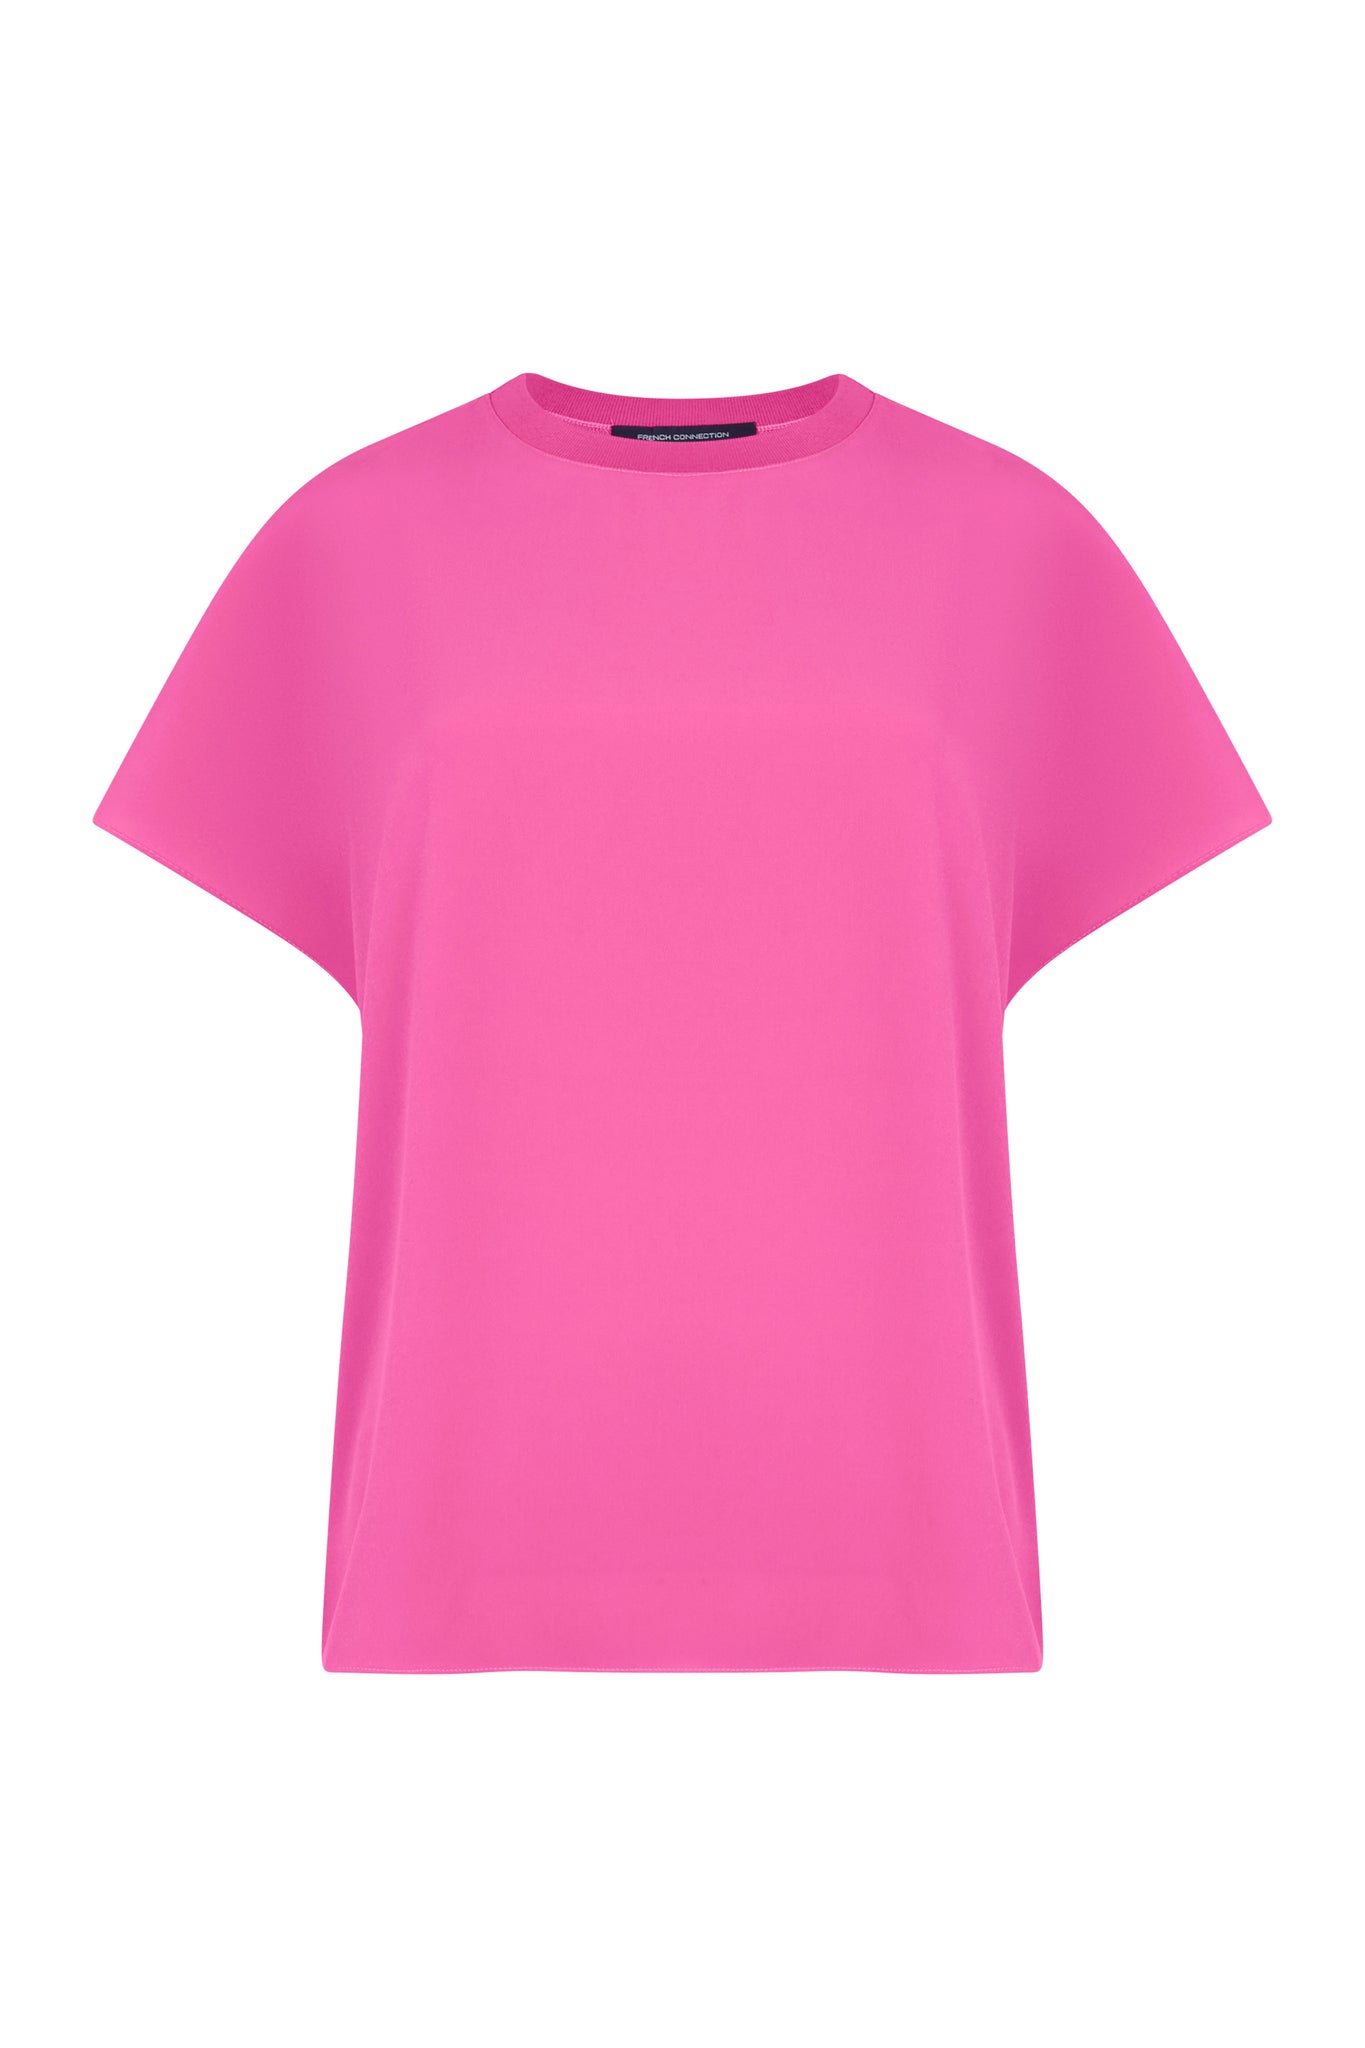 French Connection Crepe Light Crew Neck Top in Pink